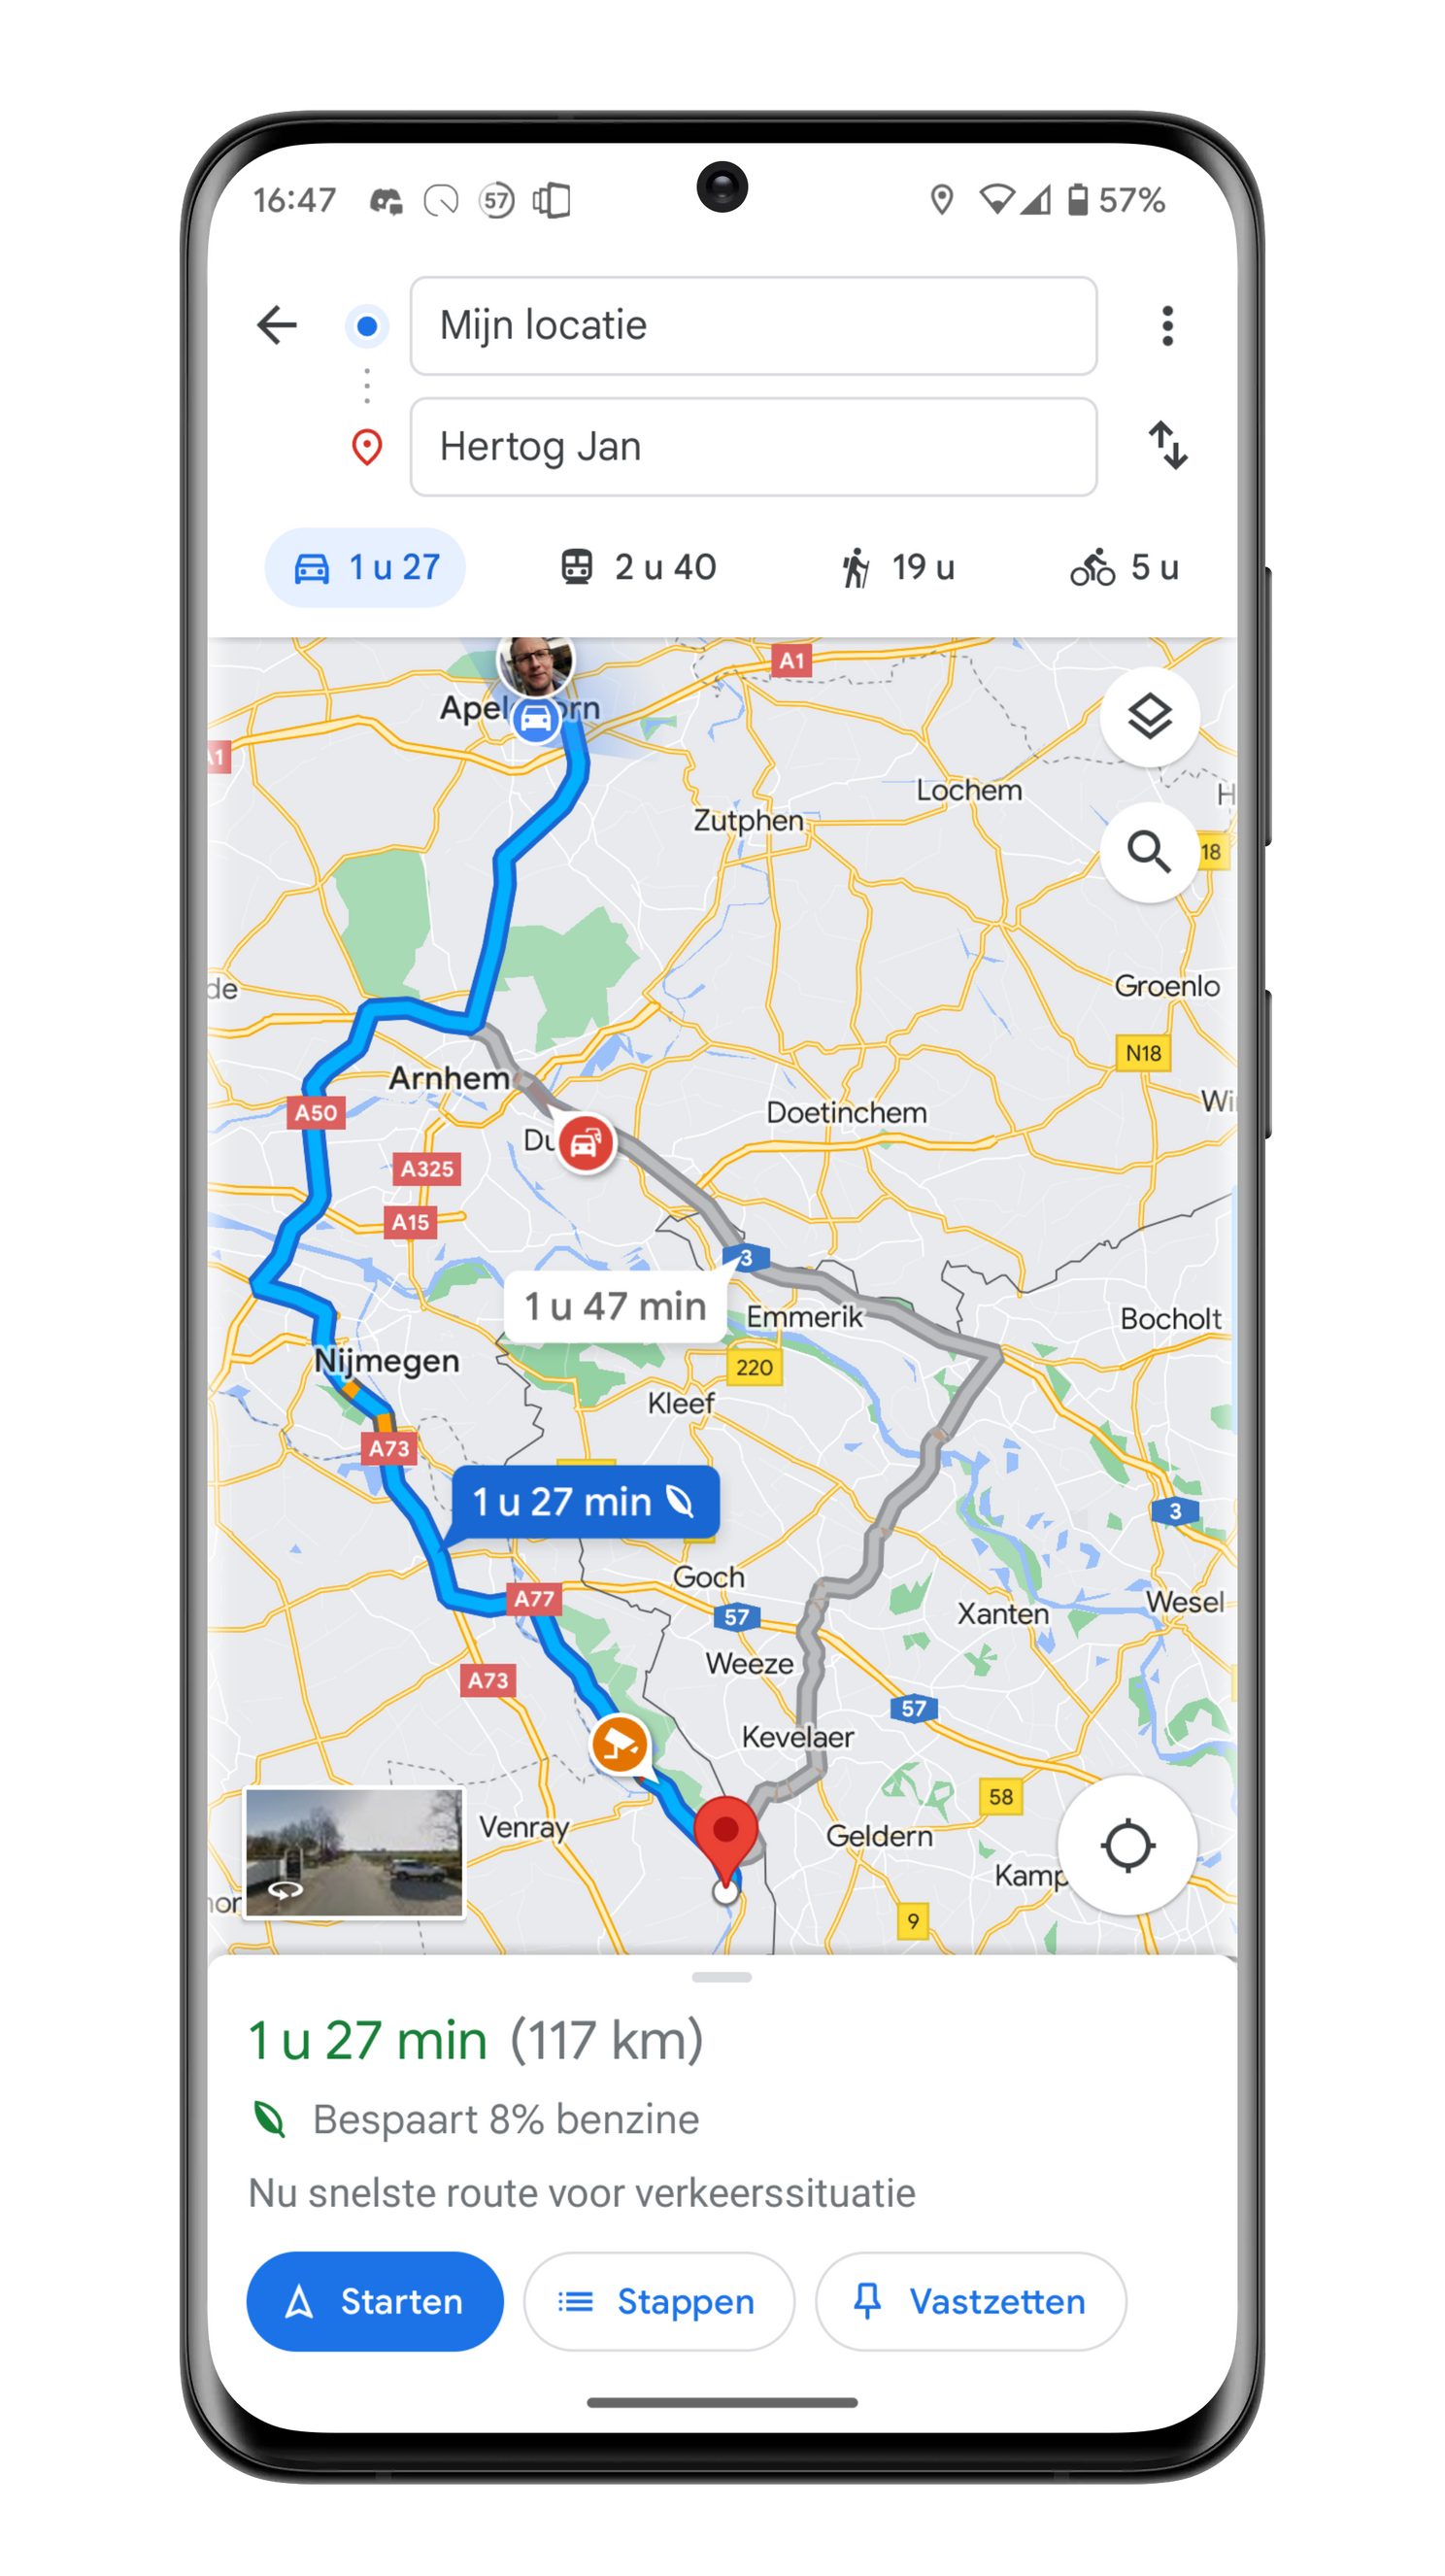 10 useful tips and tricks for using Google Maps on Android